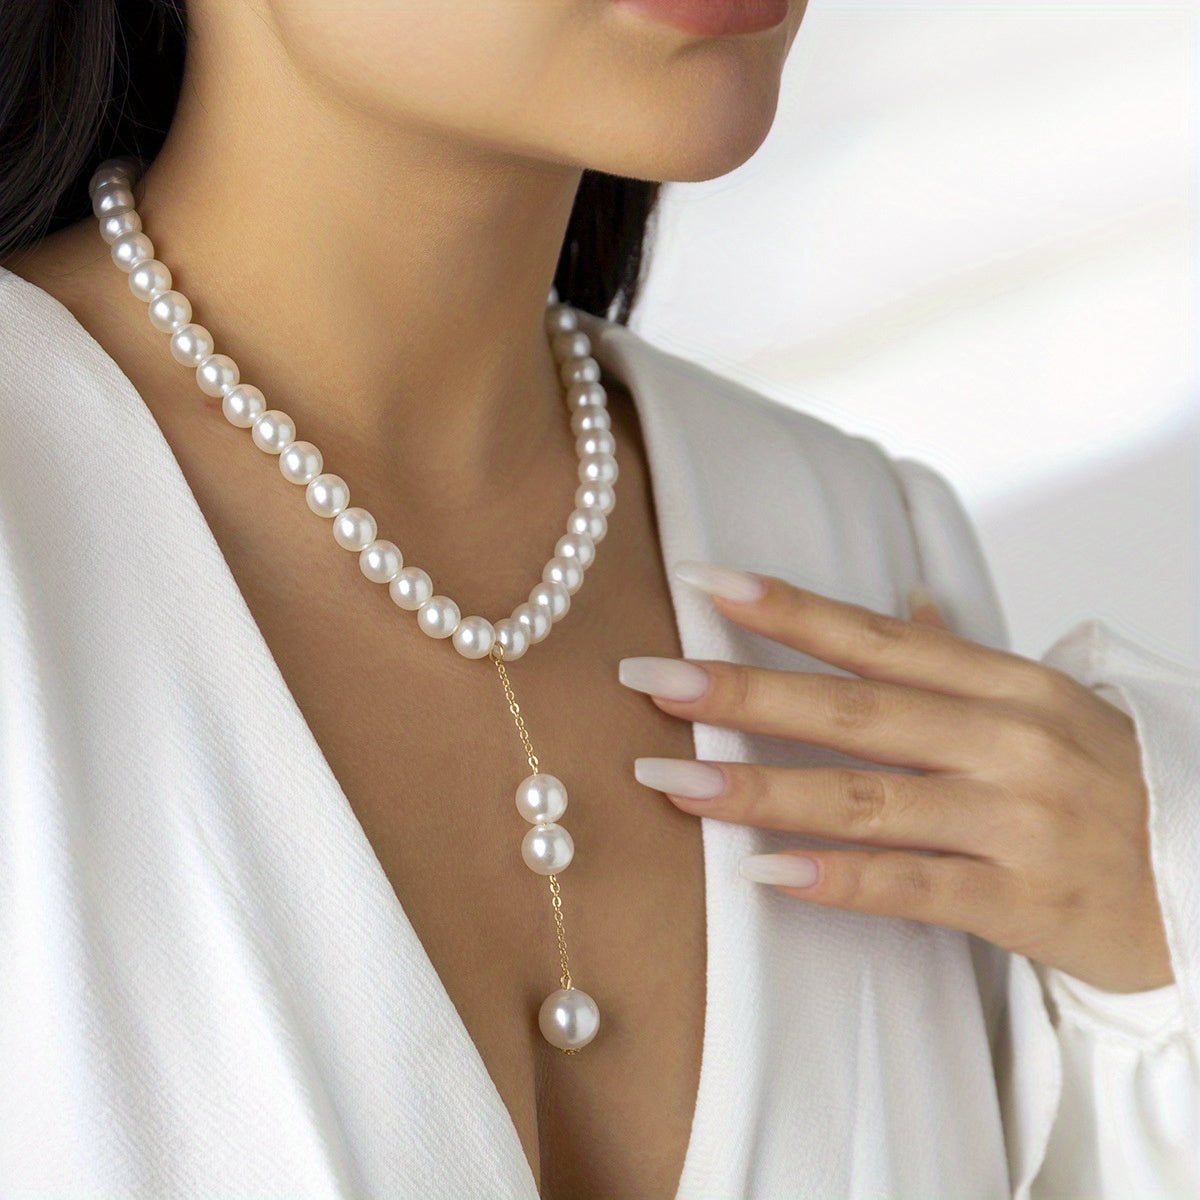 Gorgeous Y-Shaped Pearl Tassel Necklace - Perfect for Women & Girls with Simple Stylish Charm!